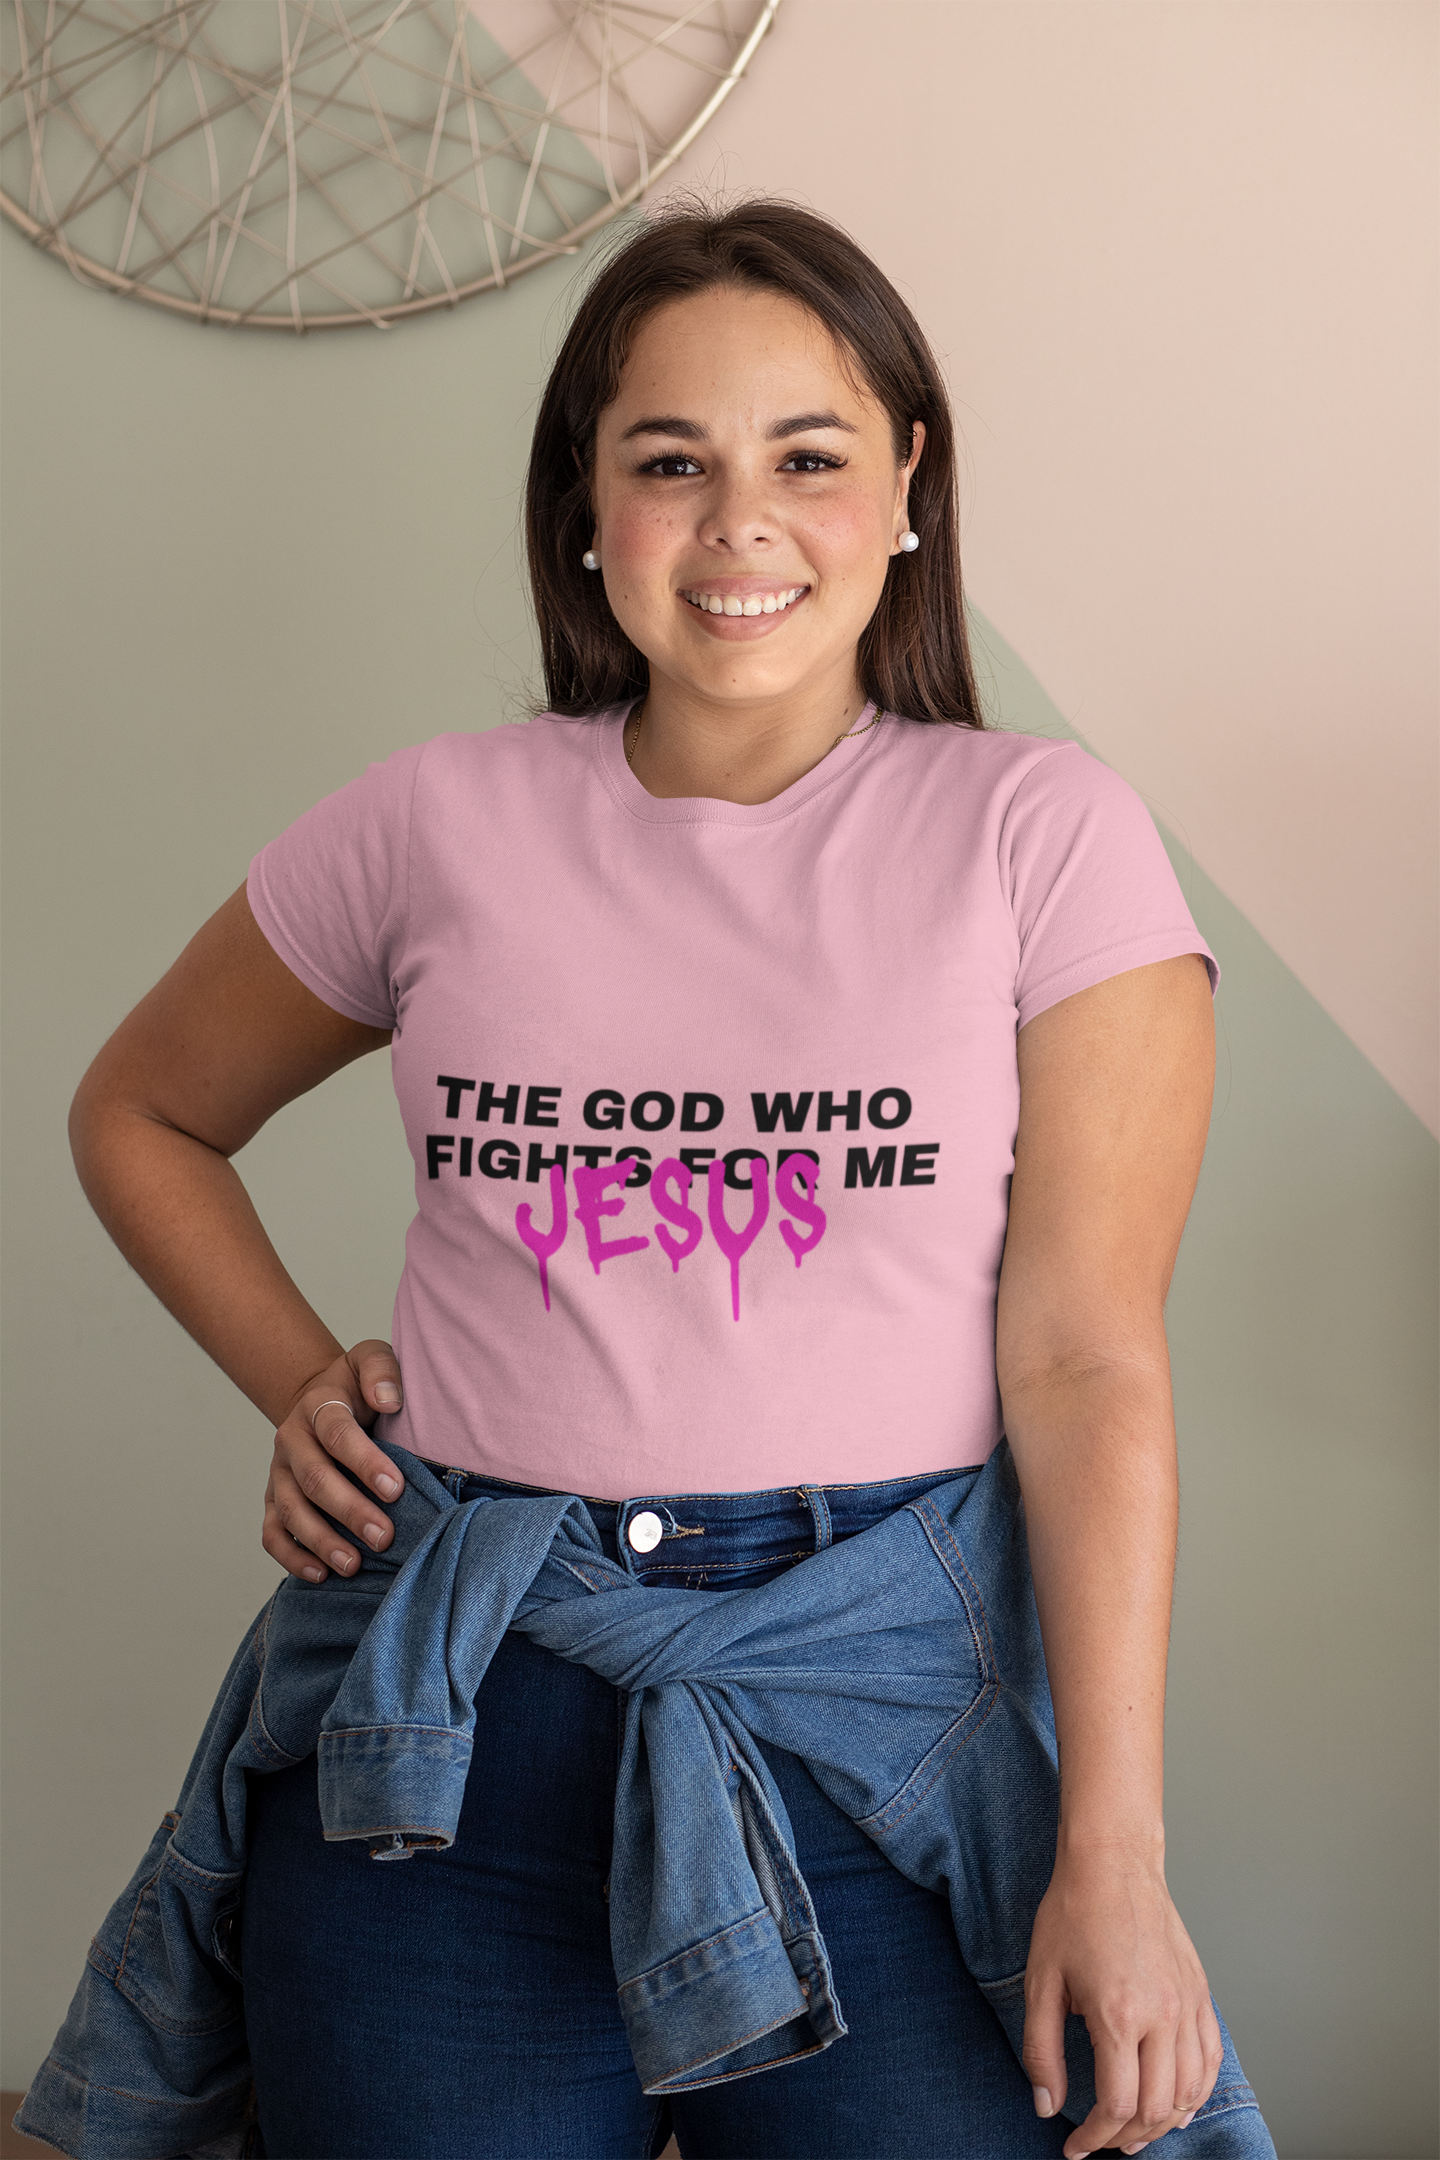 The God who fights for me Women's short sleeve t-shirt